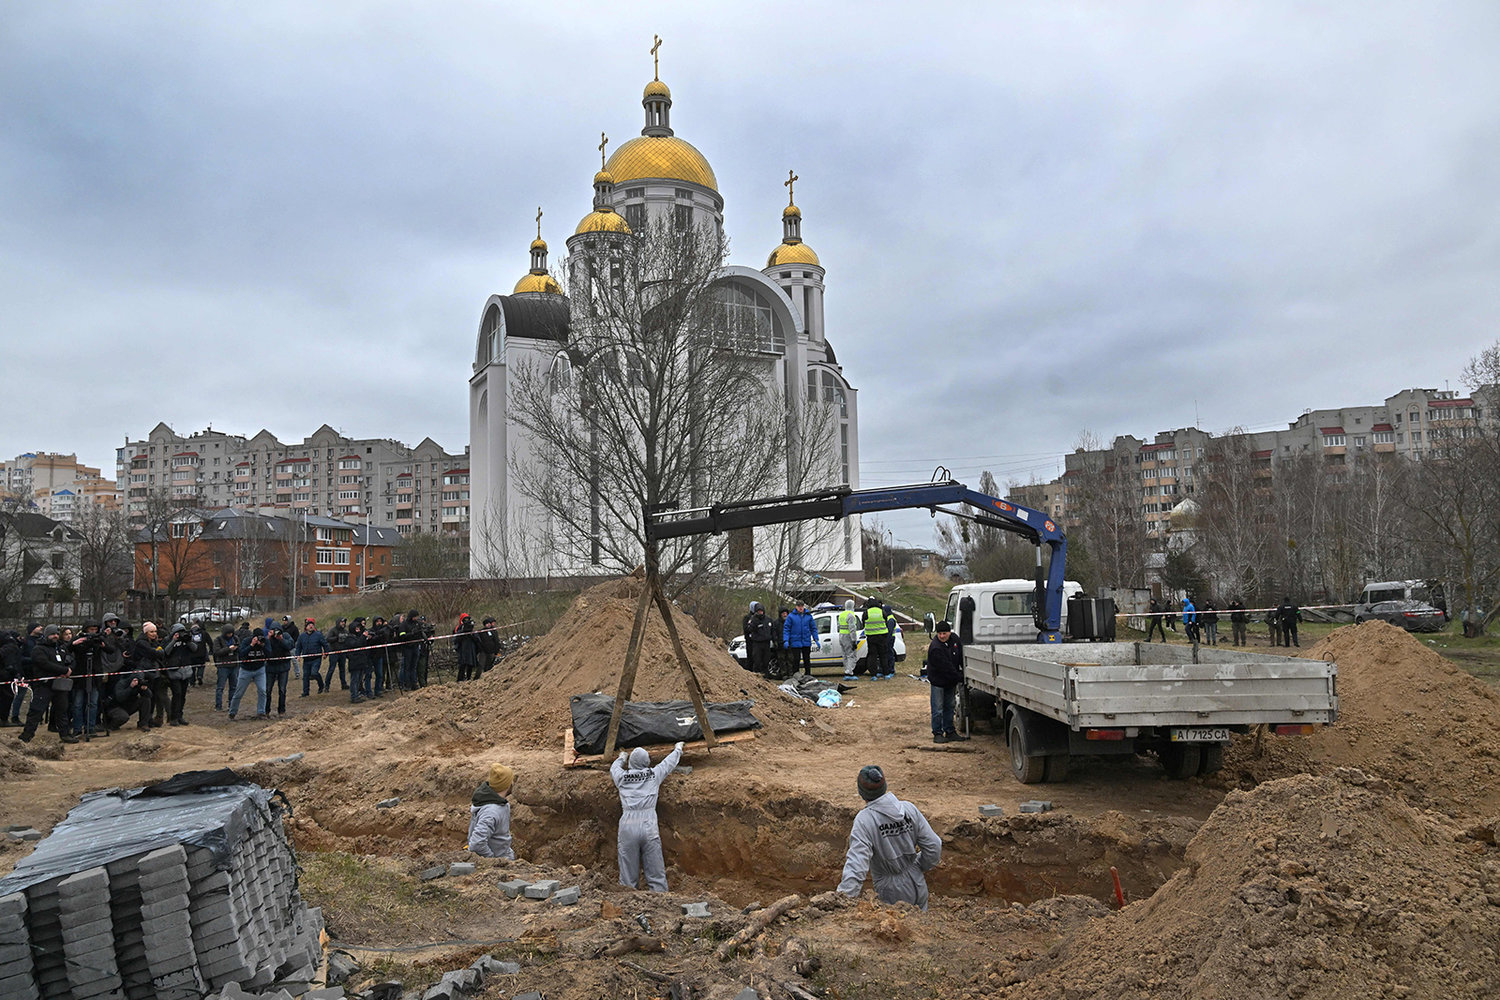 Journalists gather as bodies are exhumed from a mass-grave in the grounds of the St. Andrew and Pyervozvannoho All Saints church in the Ukrainian town of Bucha, northwest of Kyiv, on April 13, 2022. The European Commission President visited the mass grave in Bucha on April 8, where Russian forces are accused by Ukraine's allies of carrying out atrocities against civilians. (Sergei Supinsky/AFP via Getty Images/TNS)